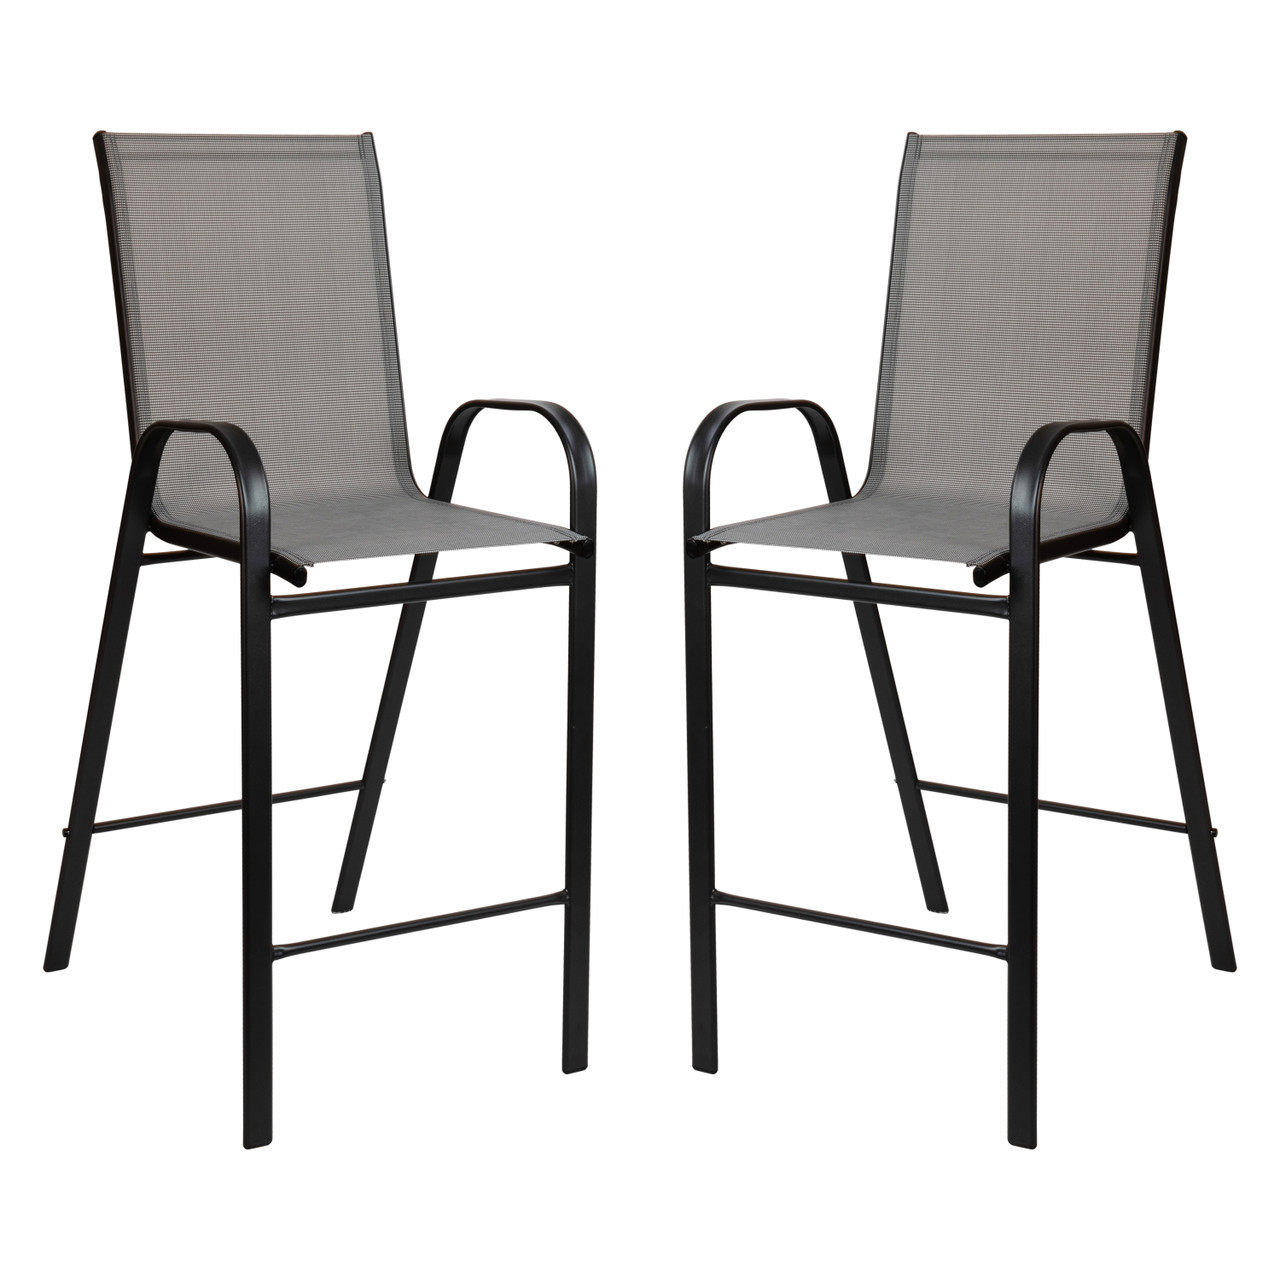 Flash Furniture 2 Pack Brazos Series Gray Outdoor Barstools with Flex Comfort Material and Metal Frame, Model# 2-JJ-092H-GR-GG